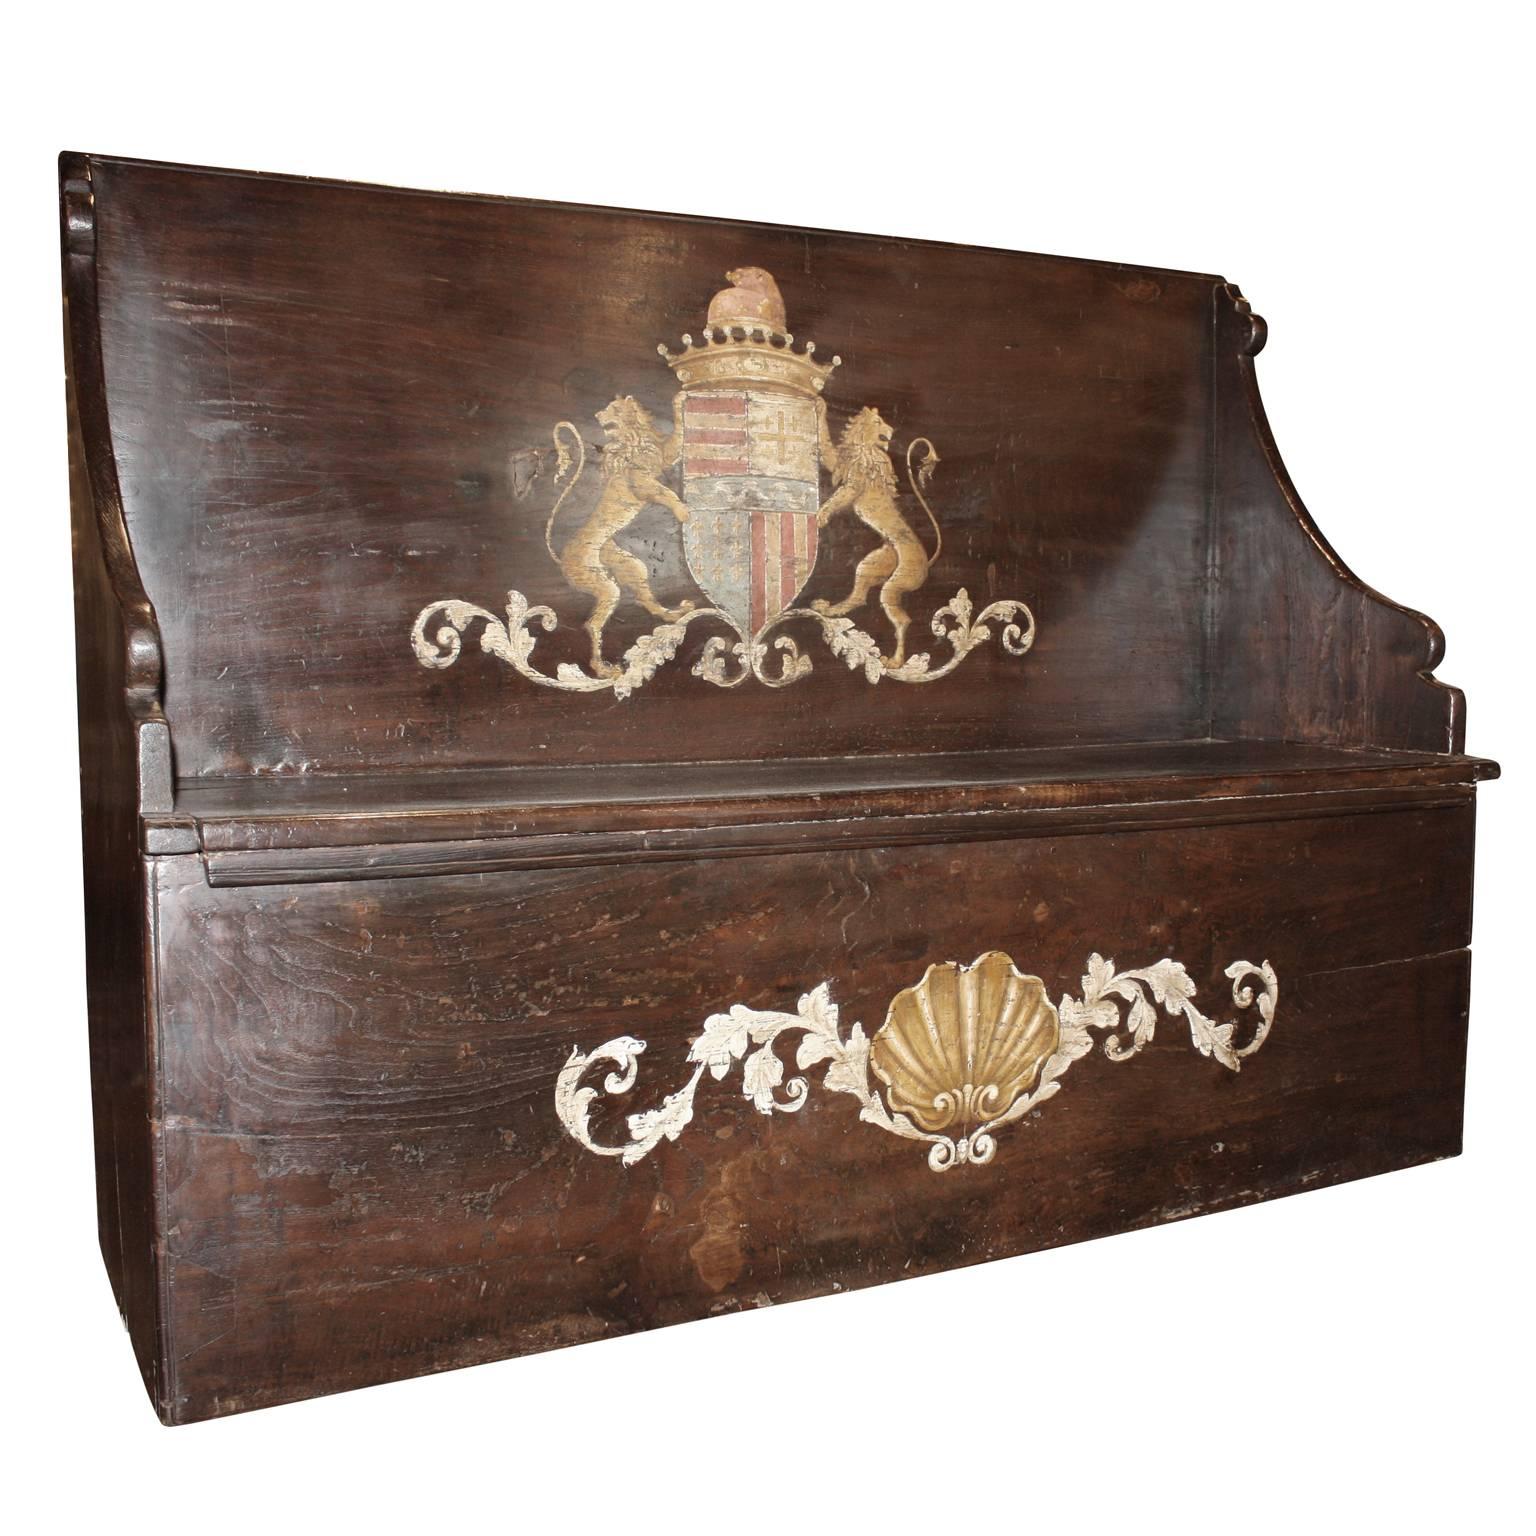 This Italian wooden hall bench from the early 19th century features a tall back, adorned in its center with a family crest made of two lions, flanking the central coat of arms, topped with a crown and a hat reminiscent of that worn by the Doge of